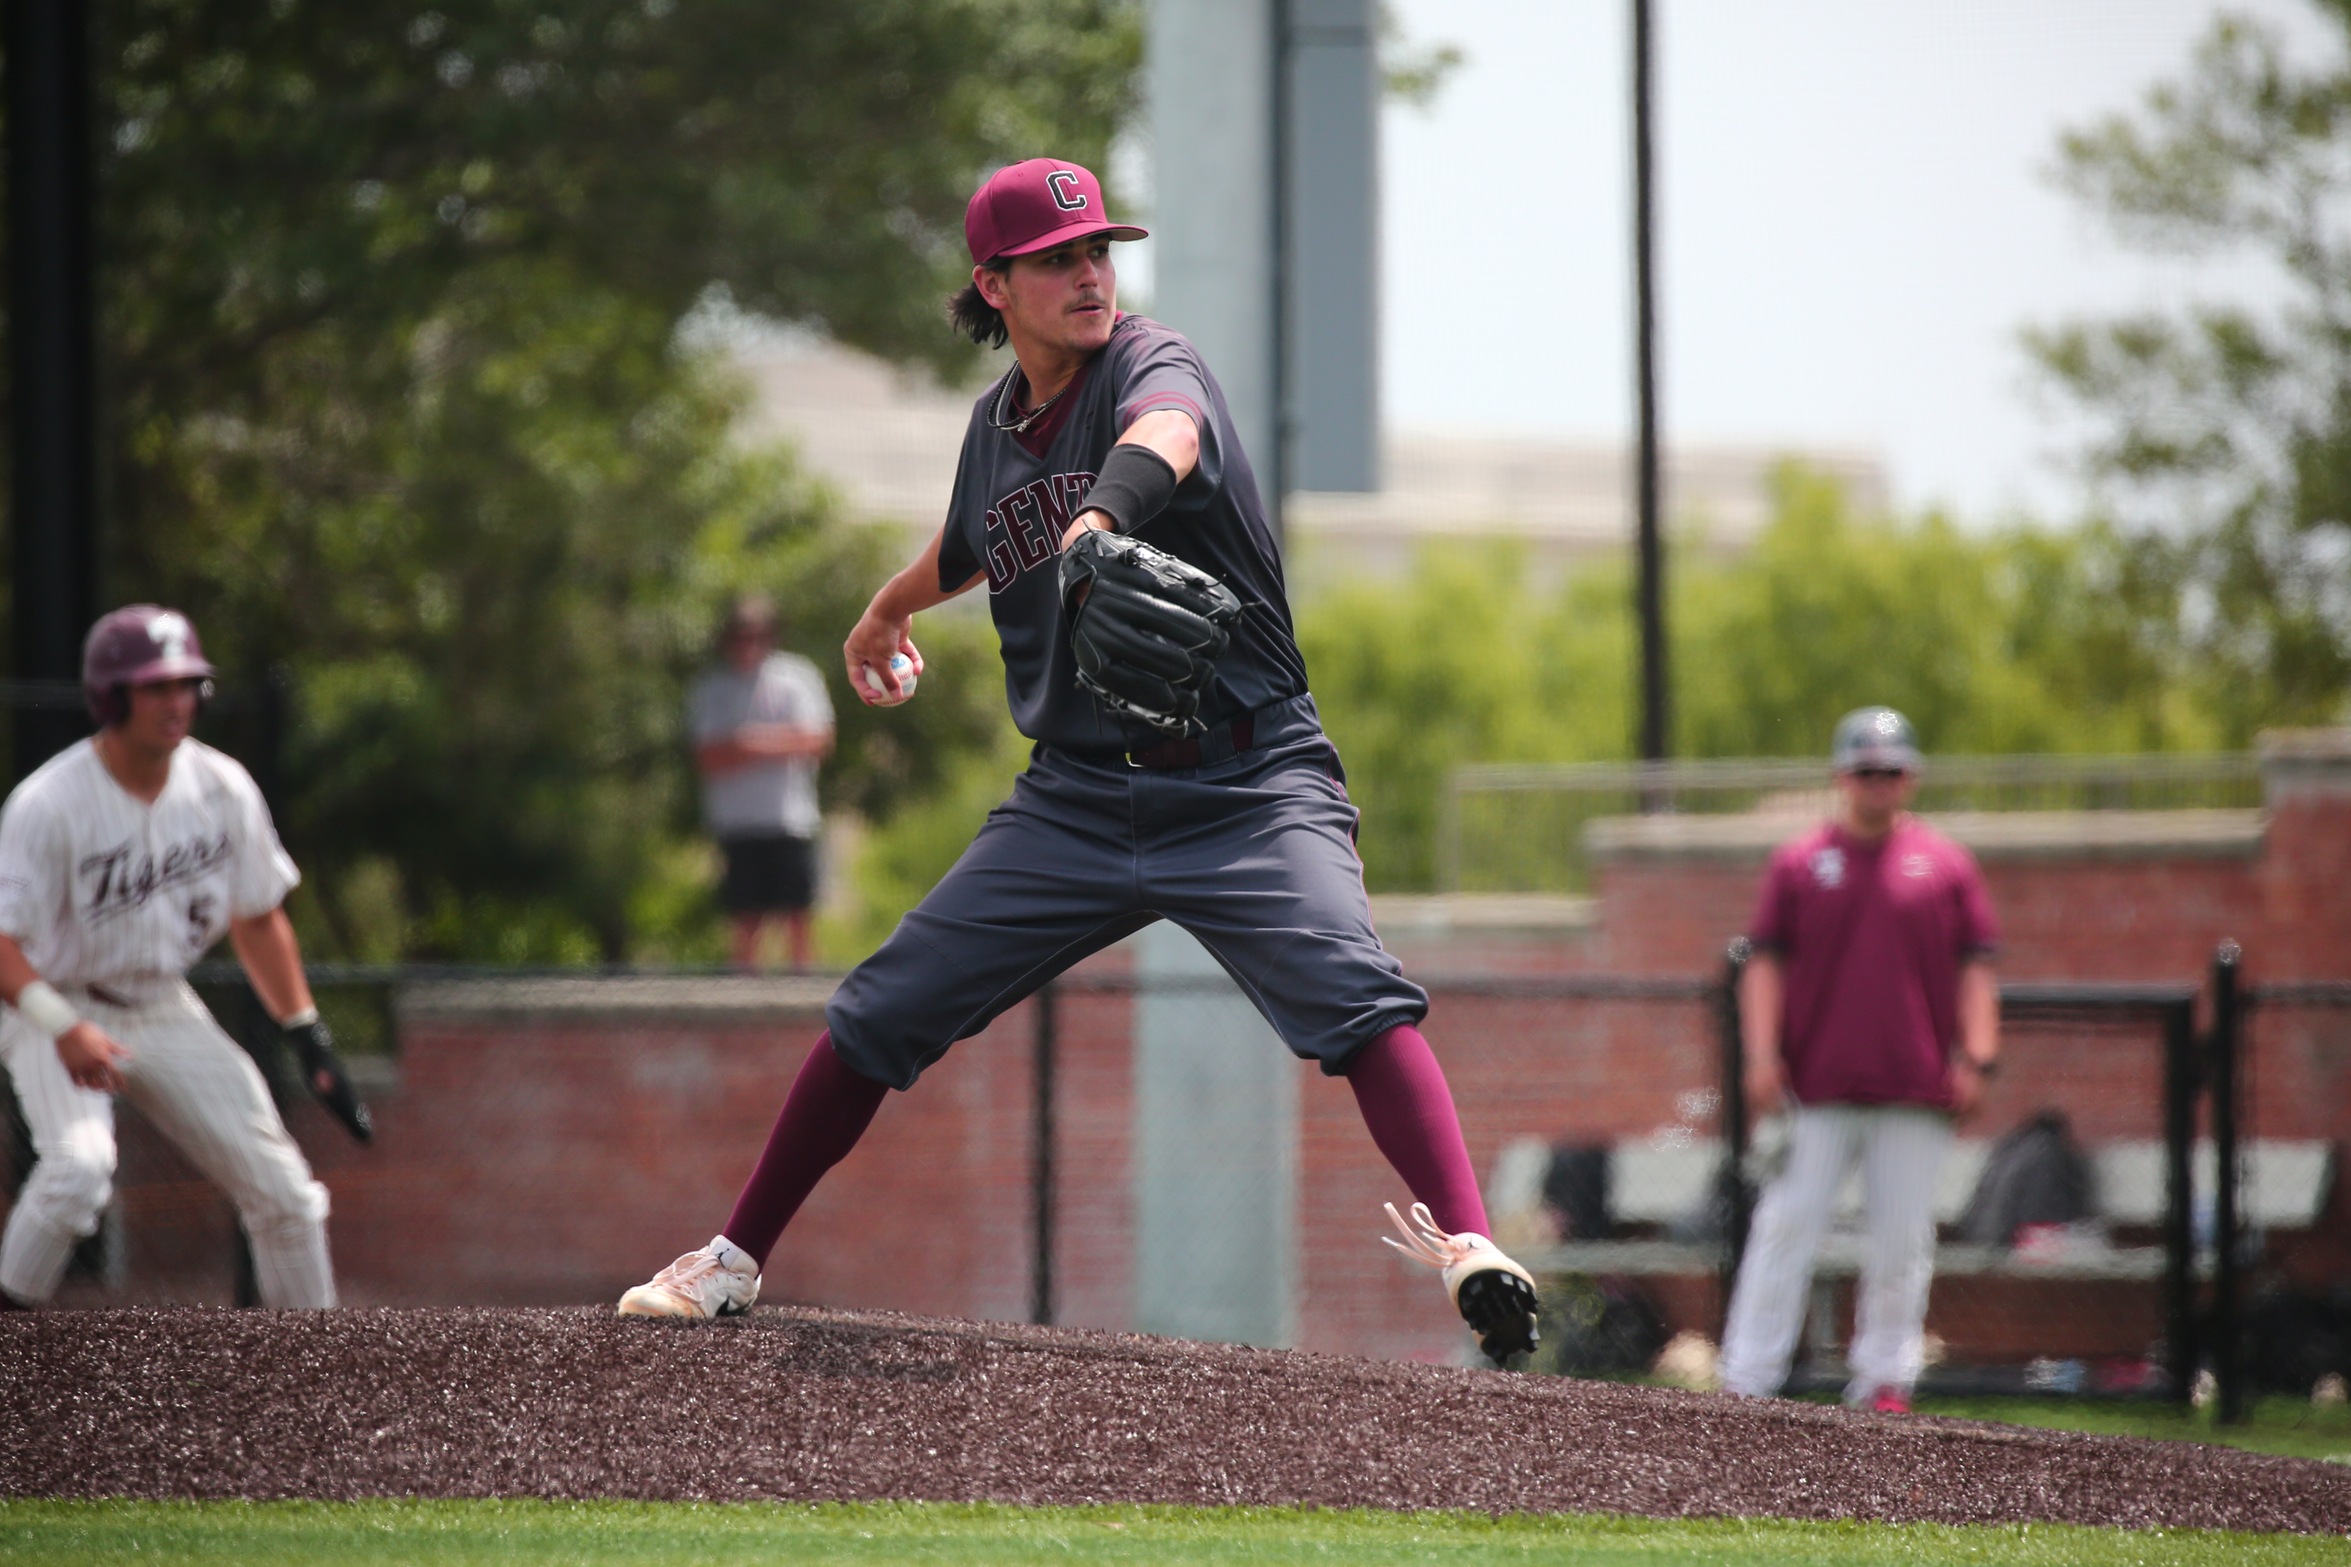 Centenary was edged 8-7 by Chapman on Sunday in Orange, Calif.